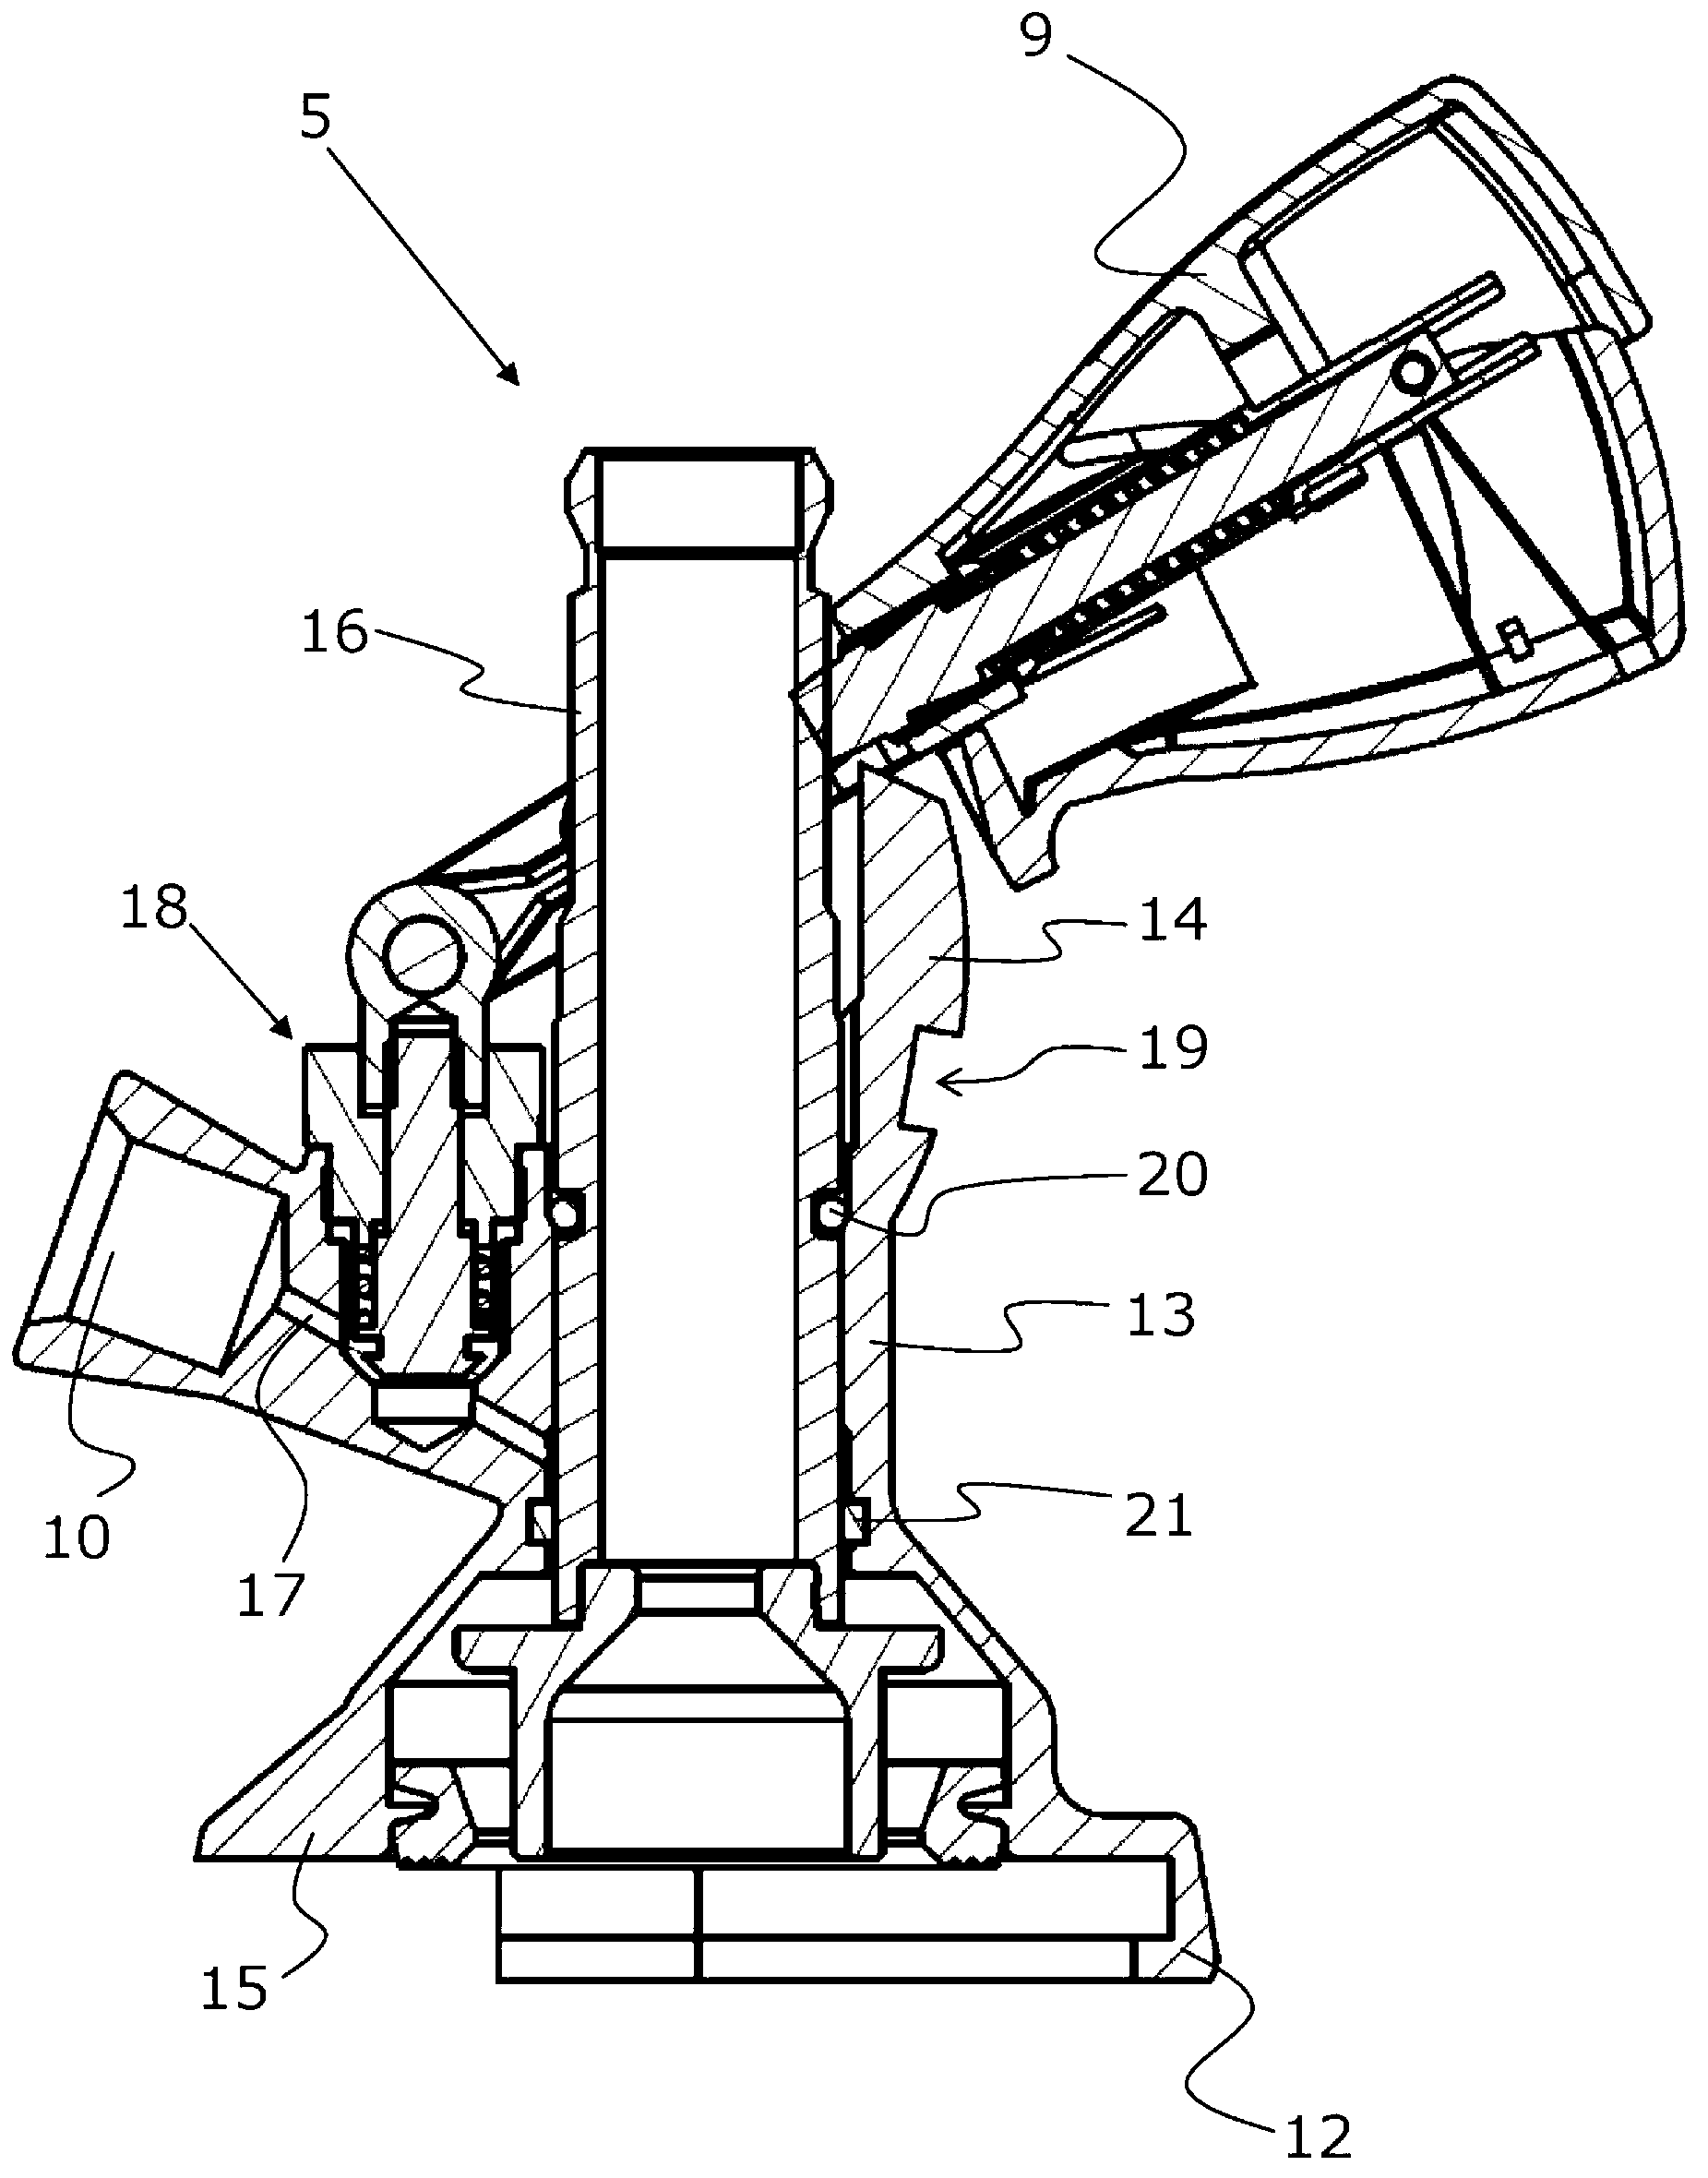 Dispense head for a dispensing system